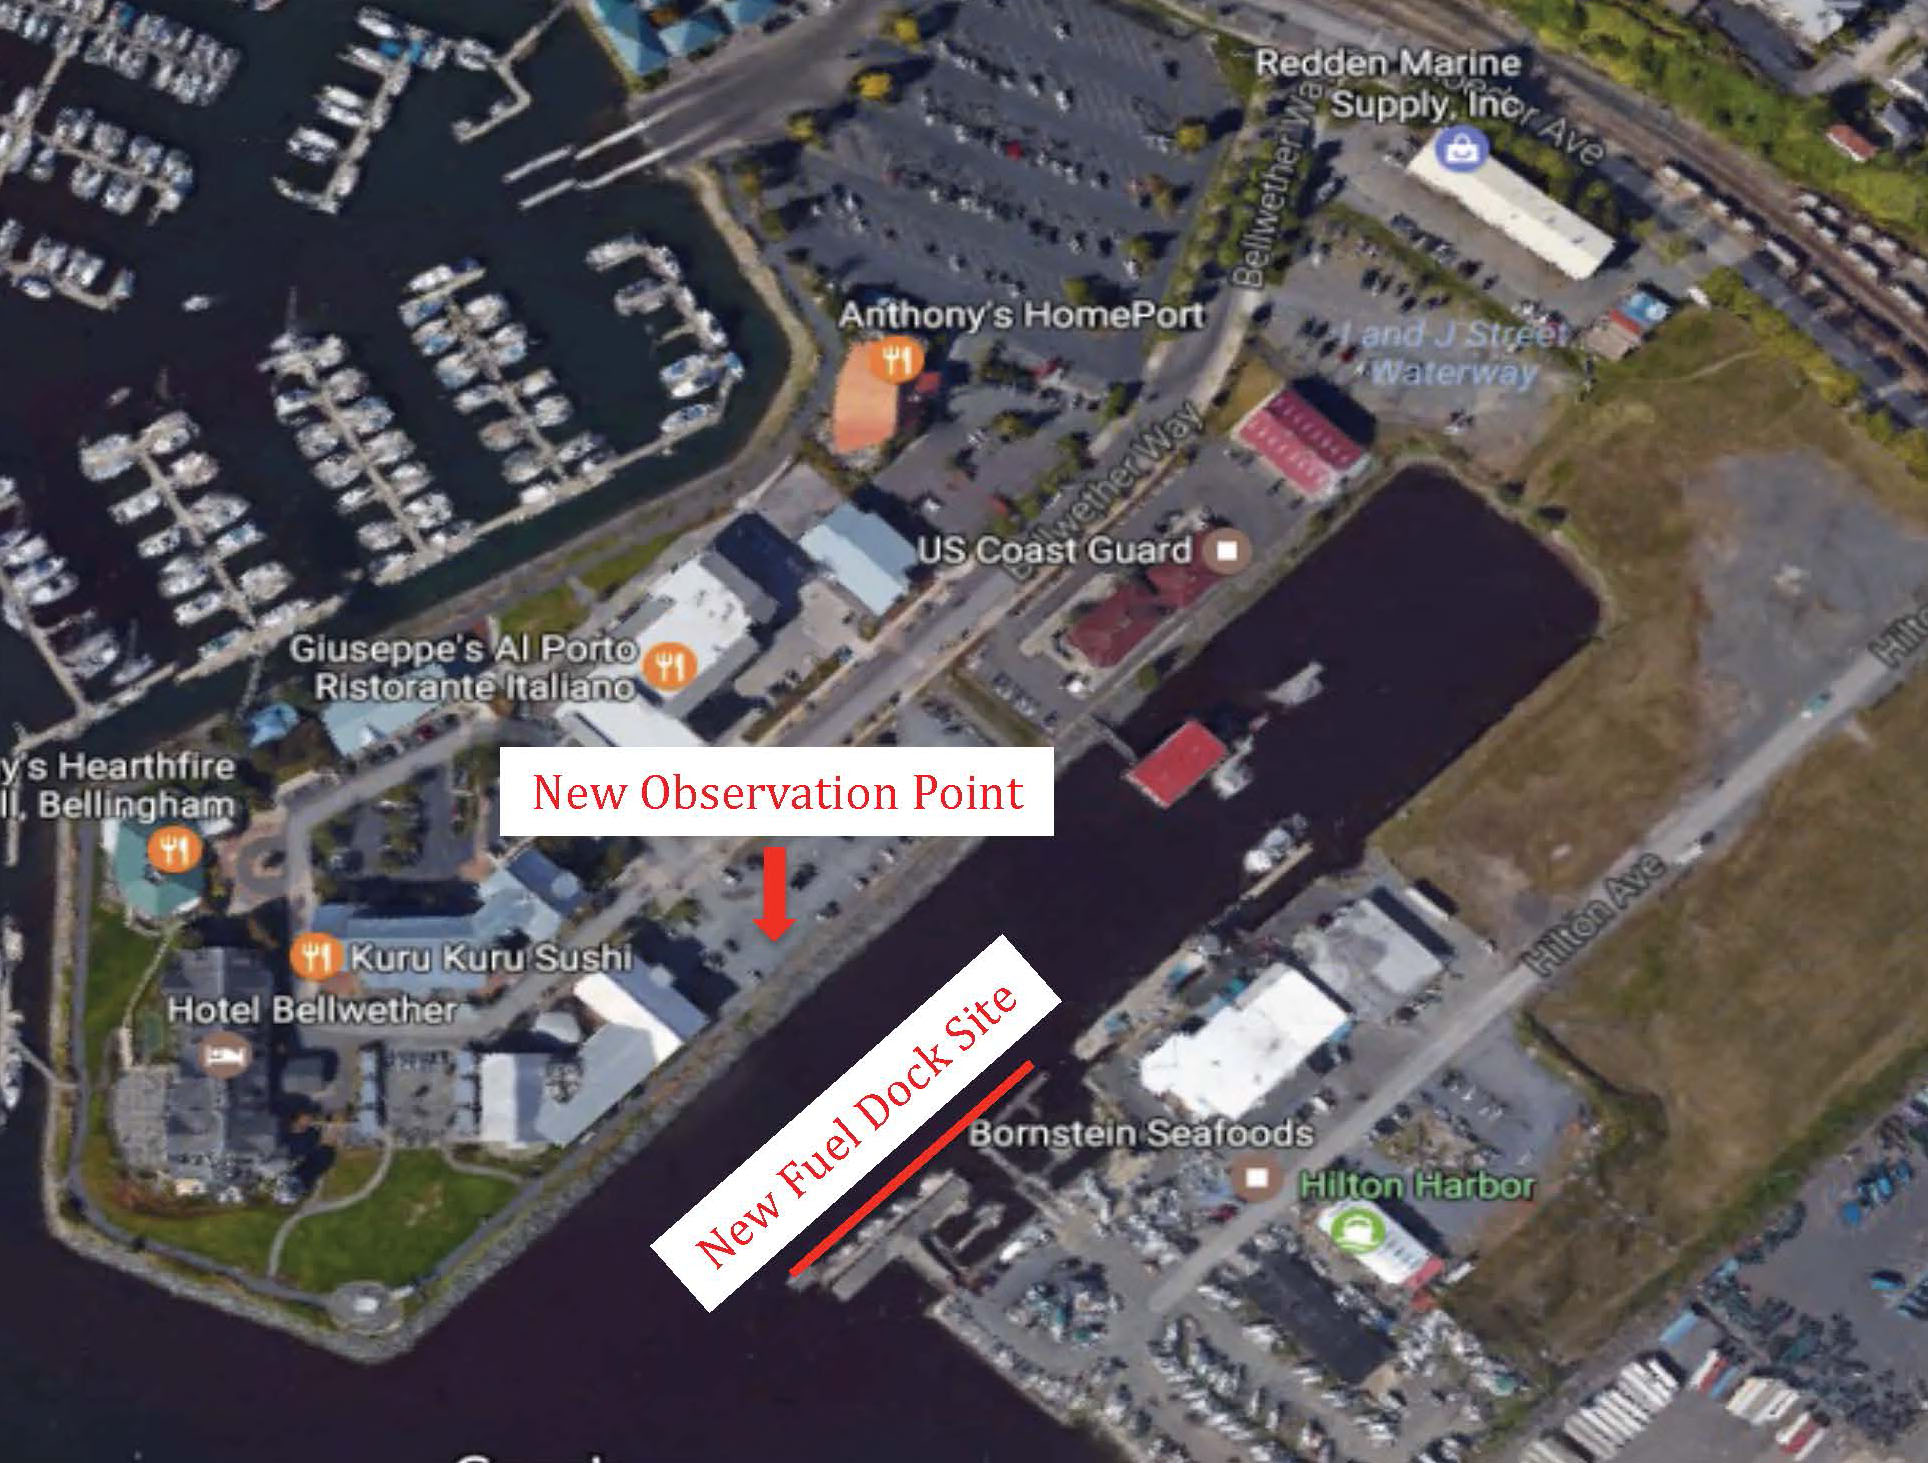 A mapof Squalicum harbor and the surrounding area, showing numerous docked boats and Bellingham businesses near the water. Both the New Observation Point, and the New Fuel Dock Site are highlighted in red.